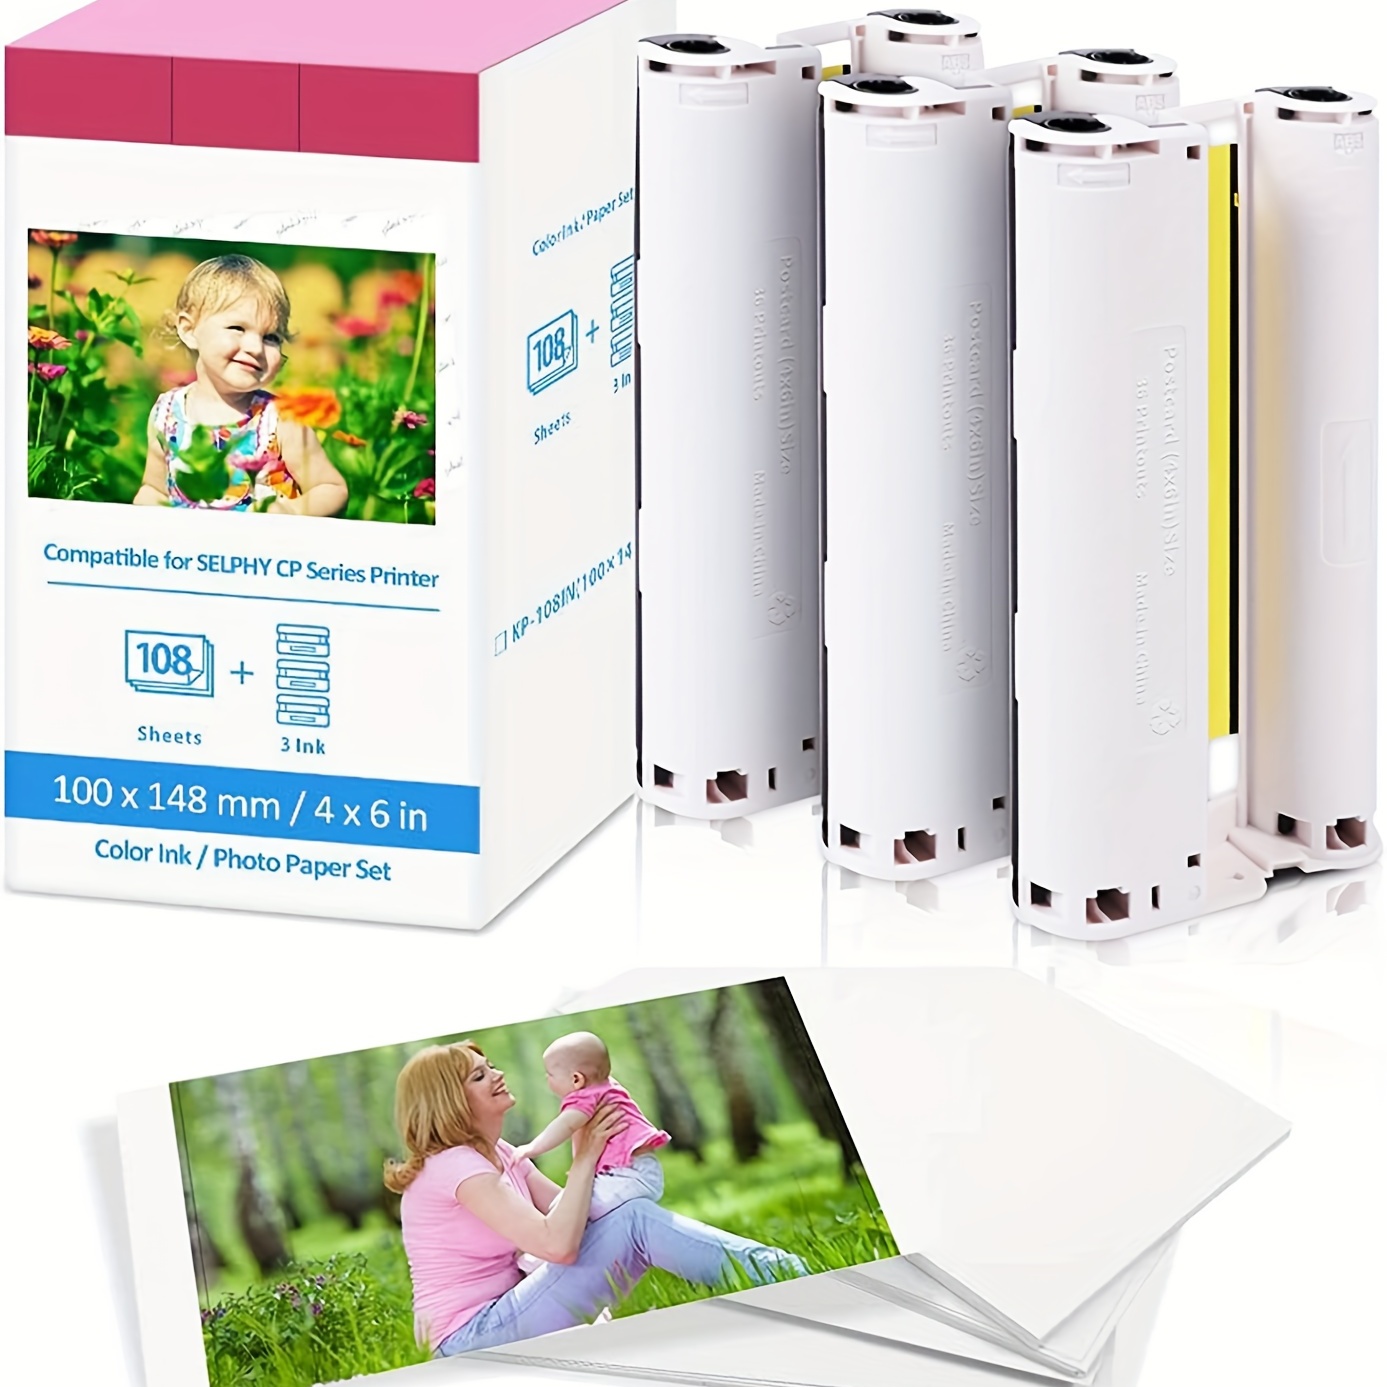 Ink & Photo Paper Compatible Canon Selphy CP1300 CP1500 CP1200 Printer  KP-108IN 10x15cm 6' x4' 108 Sheets 3 Colour Ink Cassette